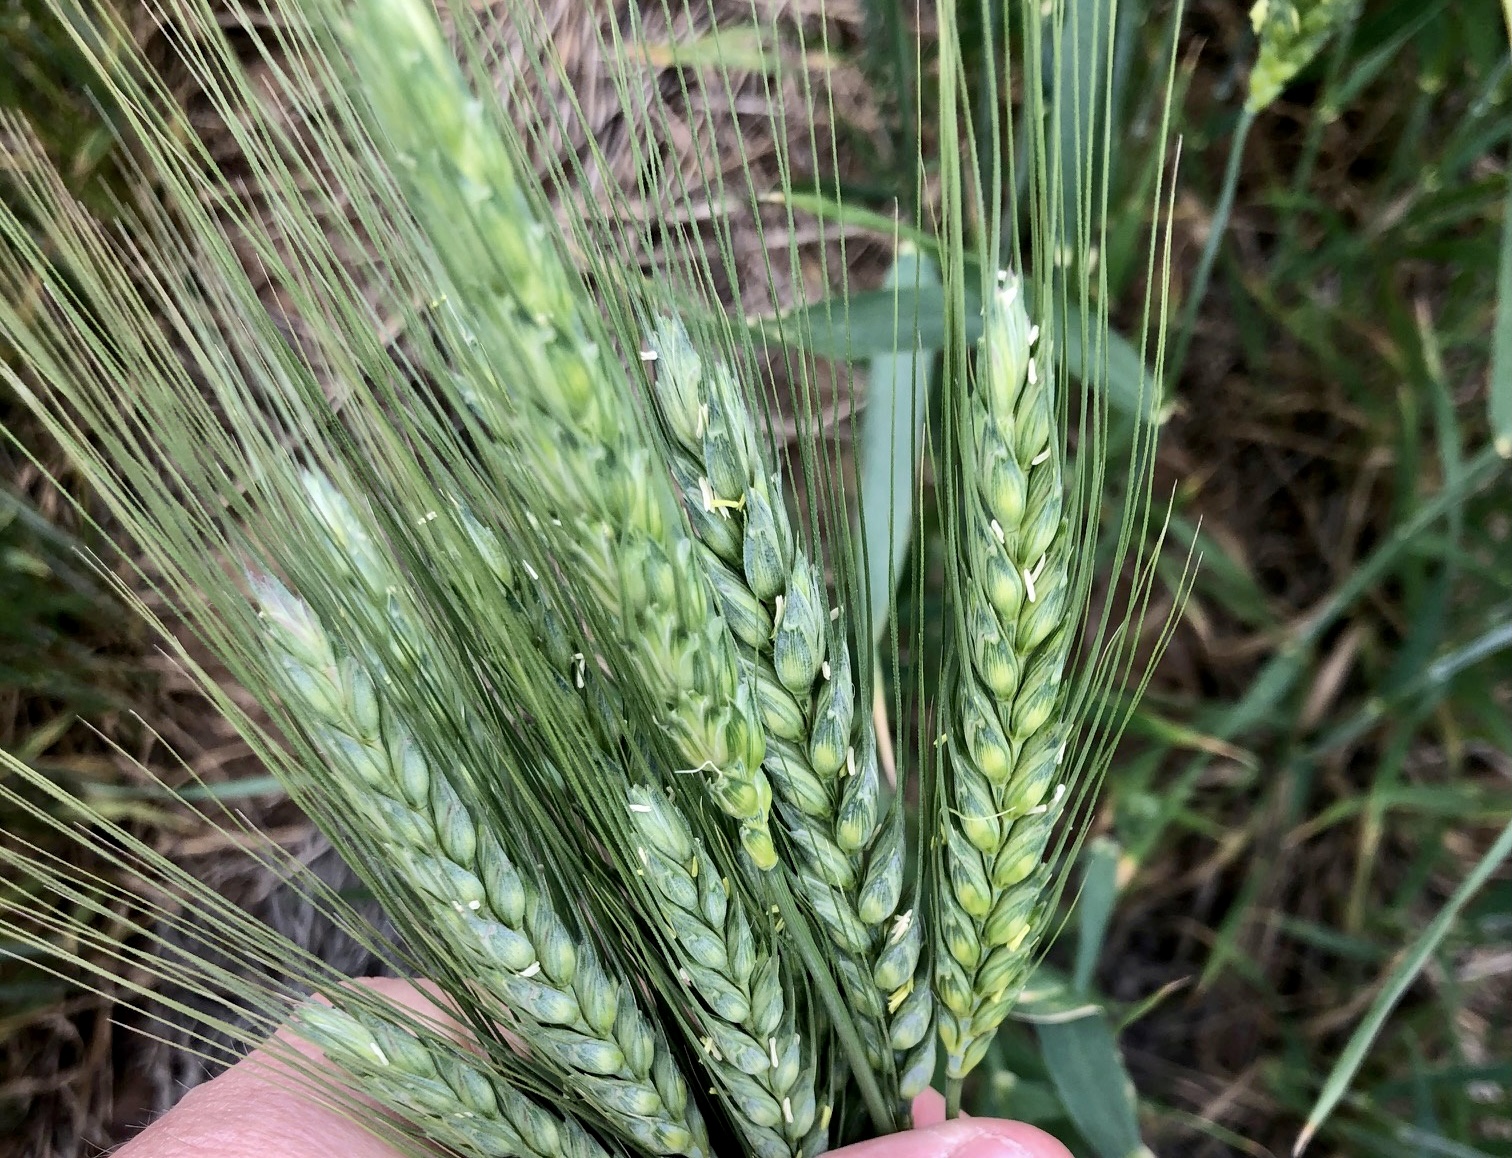 Freeze Damage Showing Up in Oklahoma Wheat Fields- But Does Not Appear to be Widespread